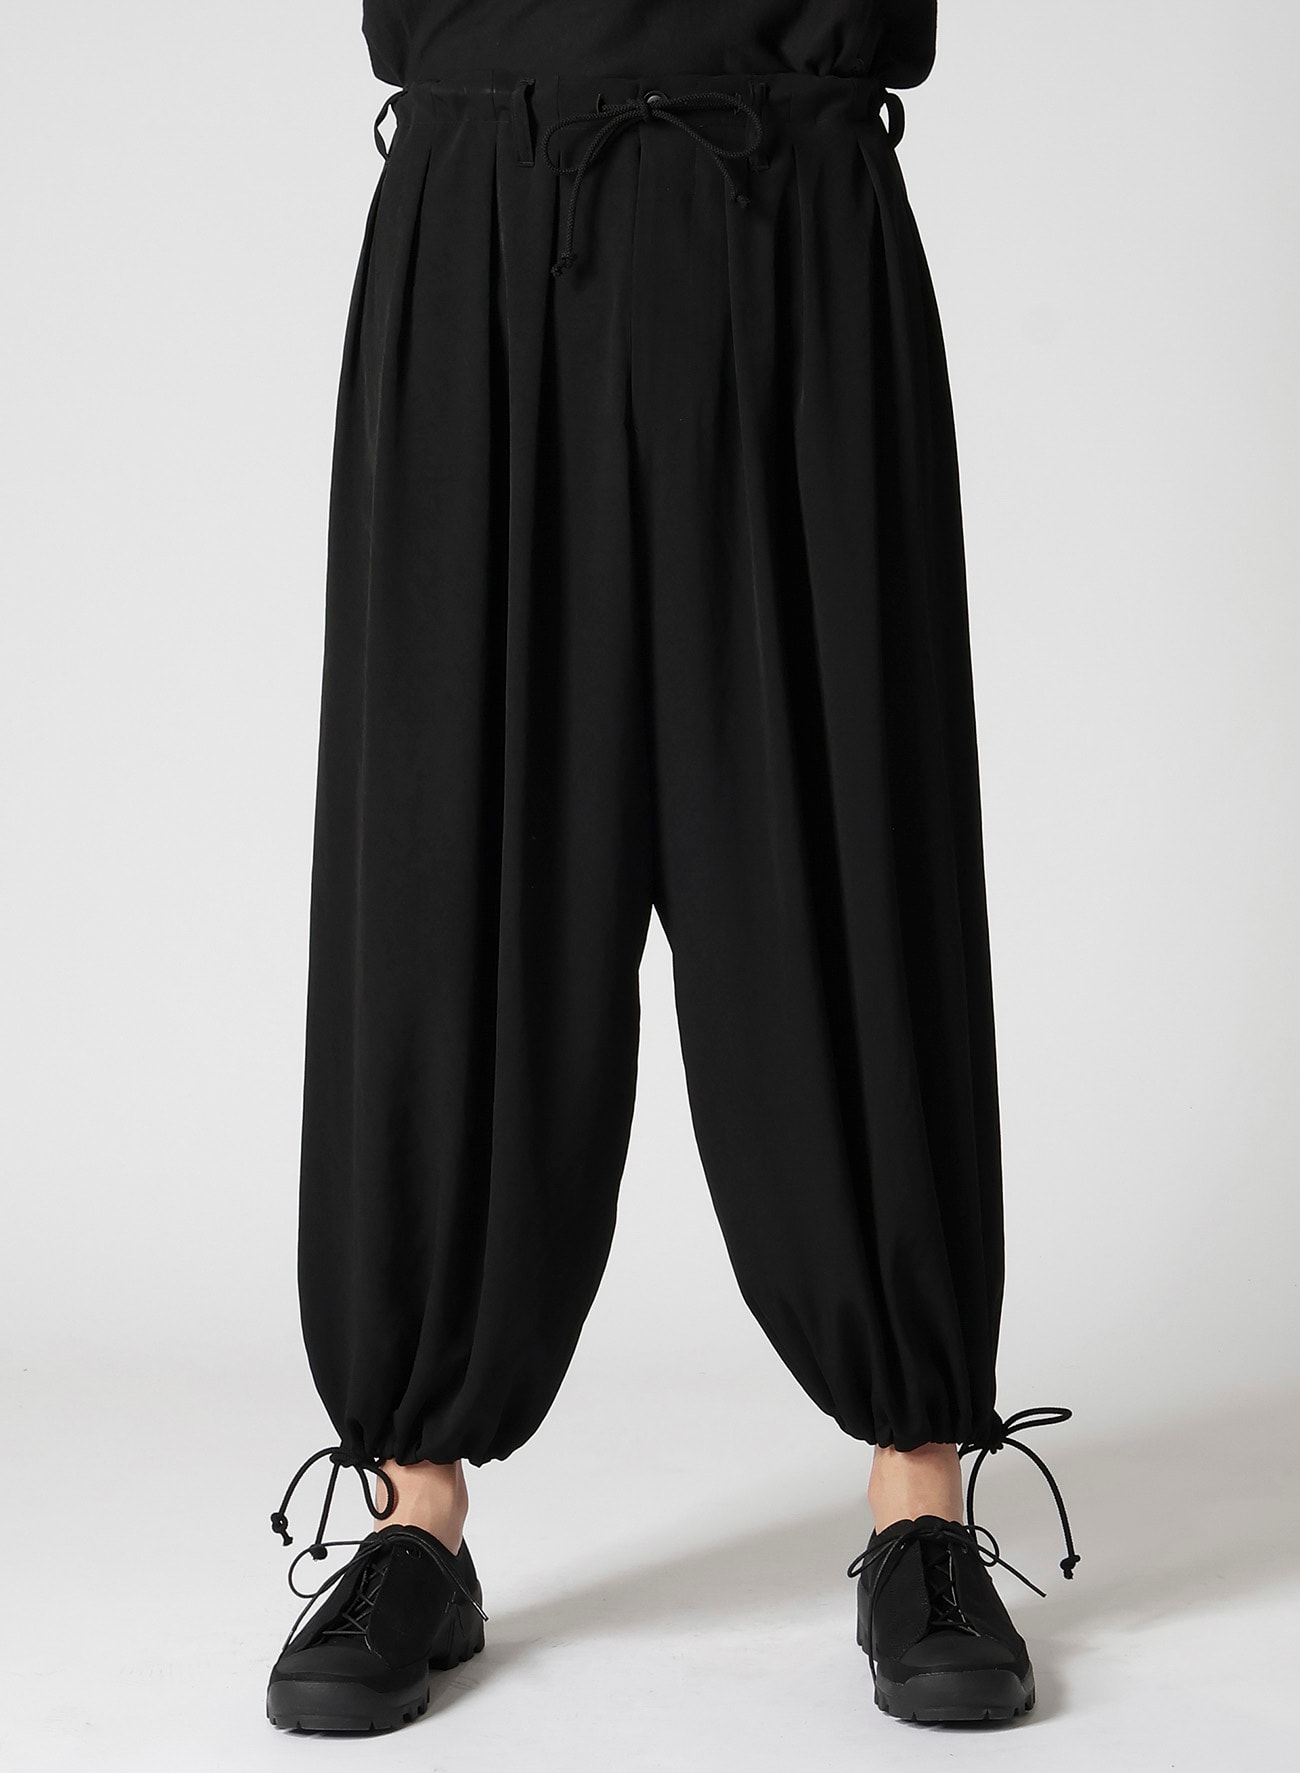 Co. High-rise Wide-leg Leather Balloon Pants in Black | Lyst